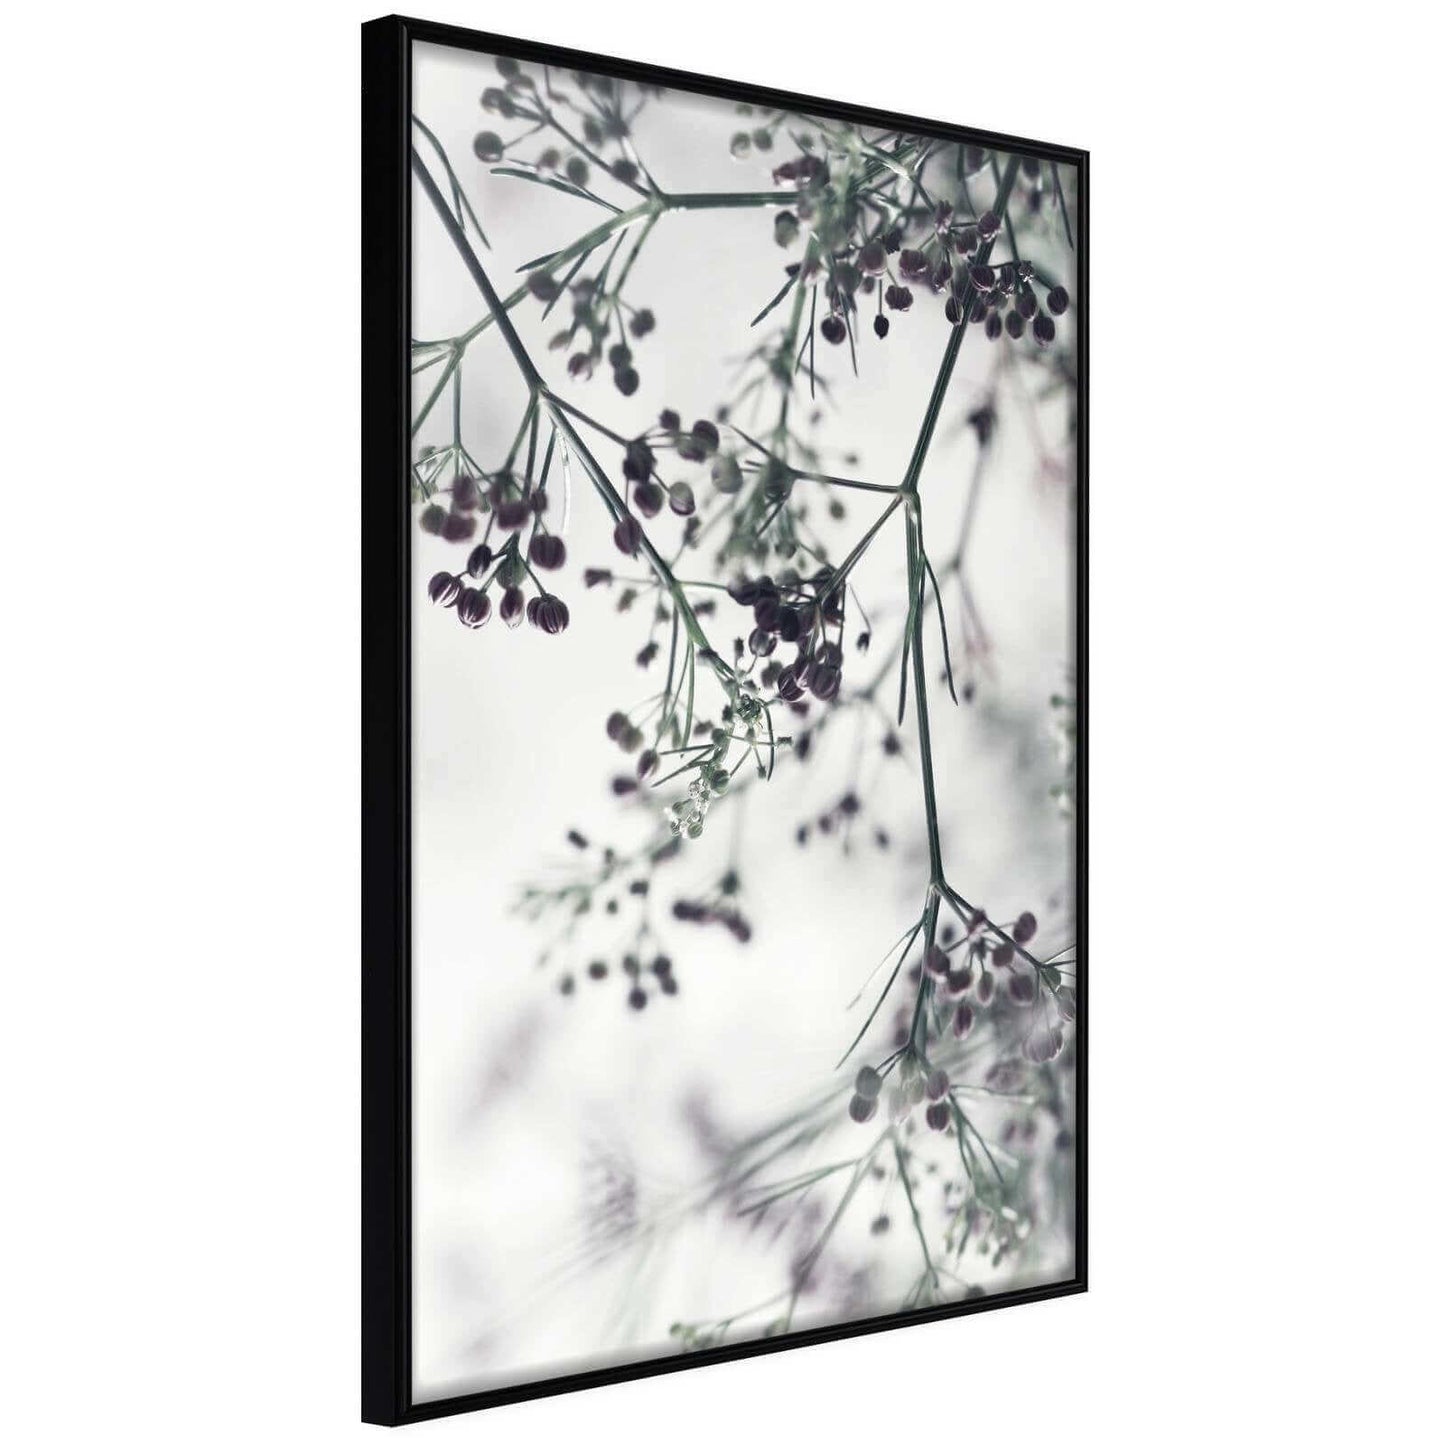 Sprinkled with Flowers, Artgeist, black and white, nature, plants, poster style